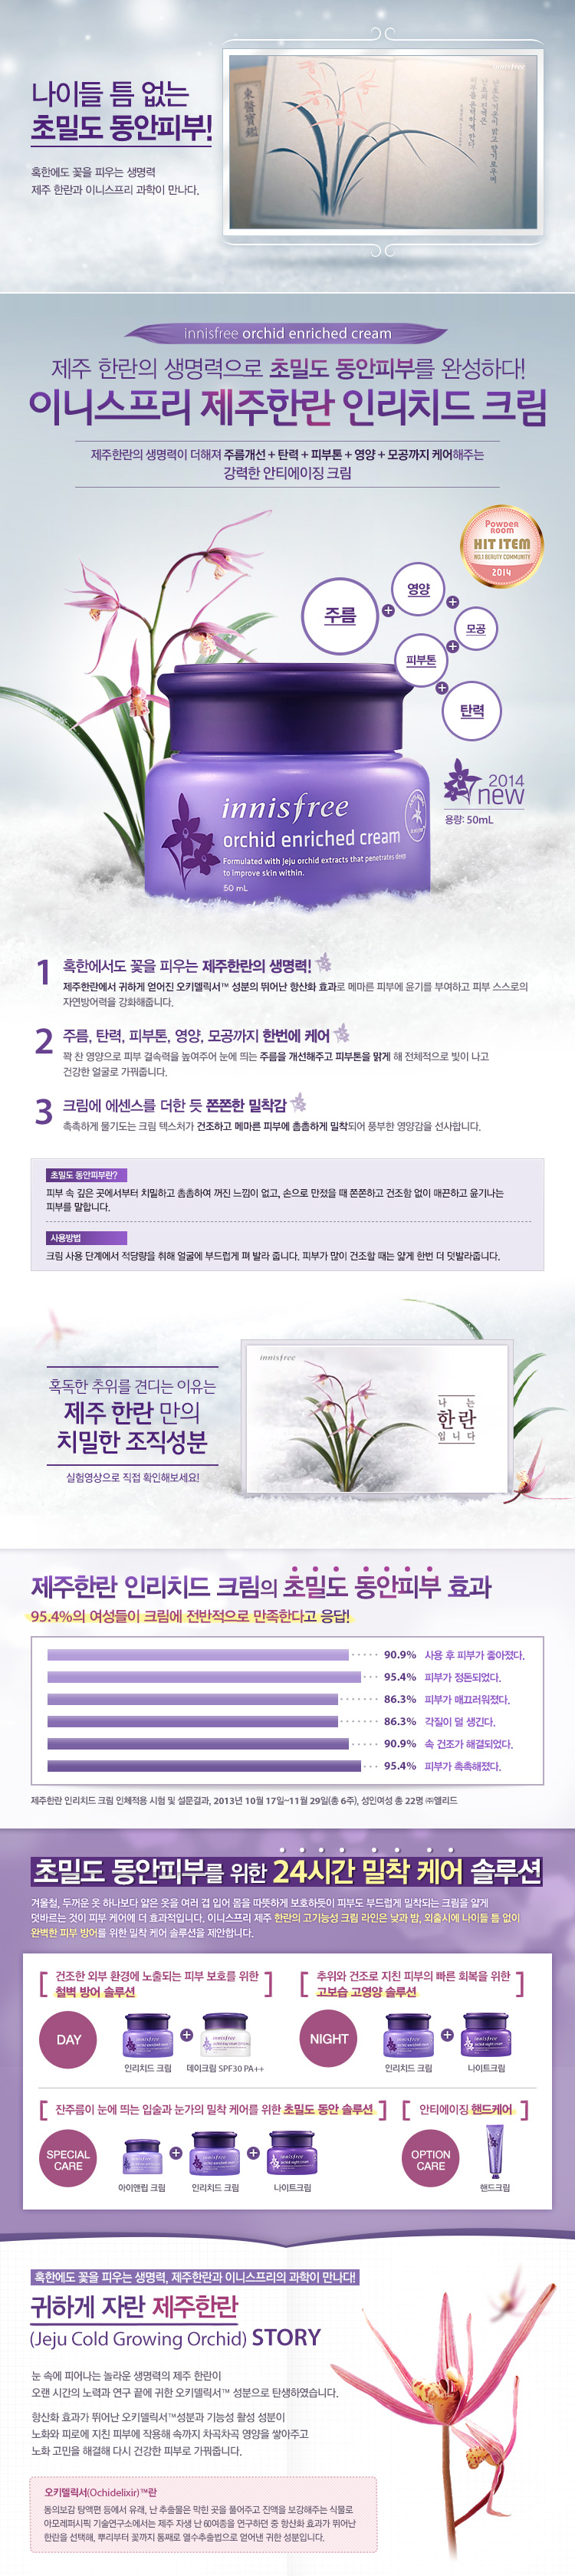 Innisfree - Orchid enriched cream